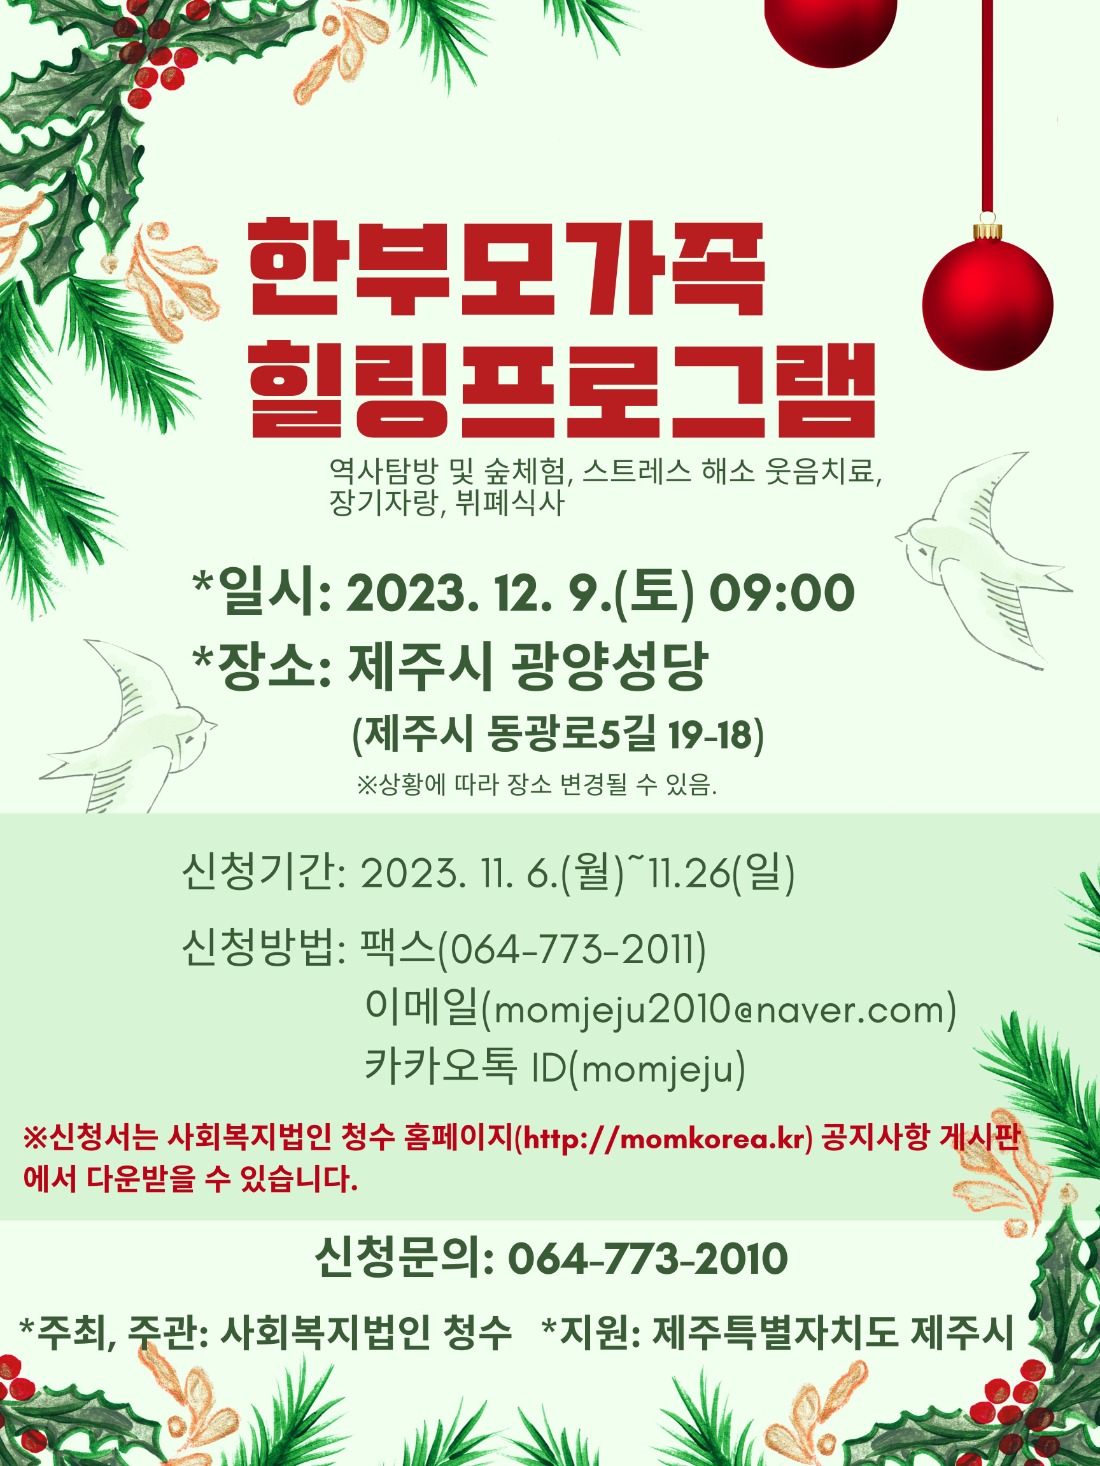 6-Green and Red Modern Christmas Party Poster.jpg